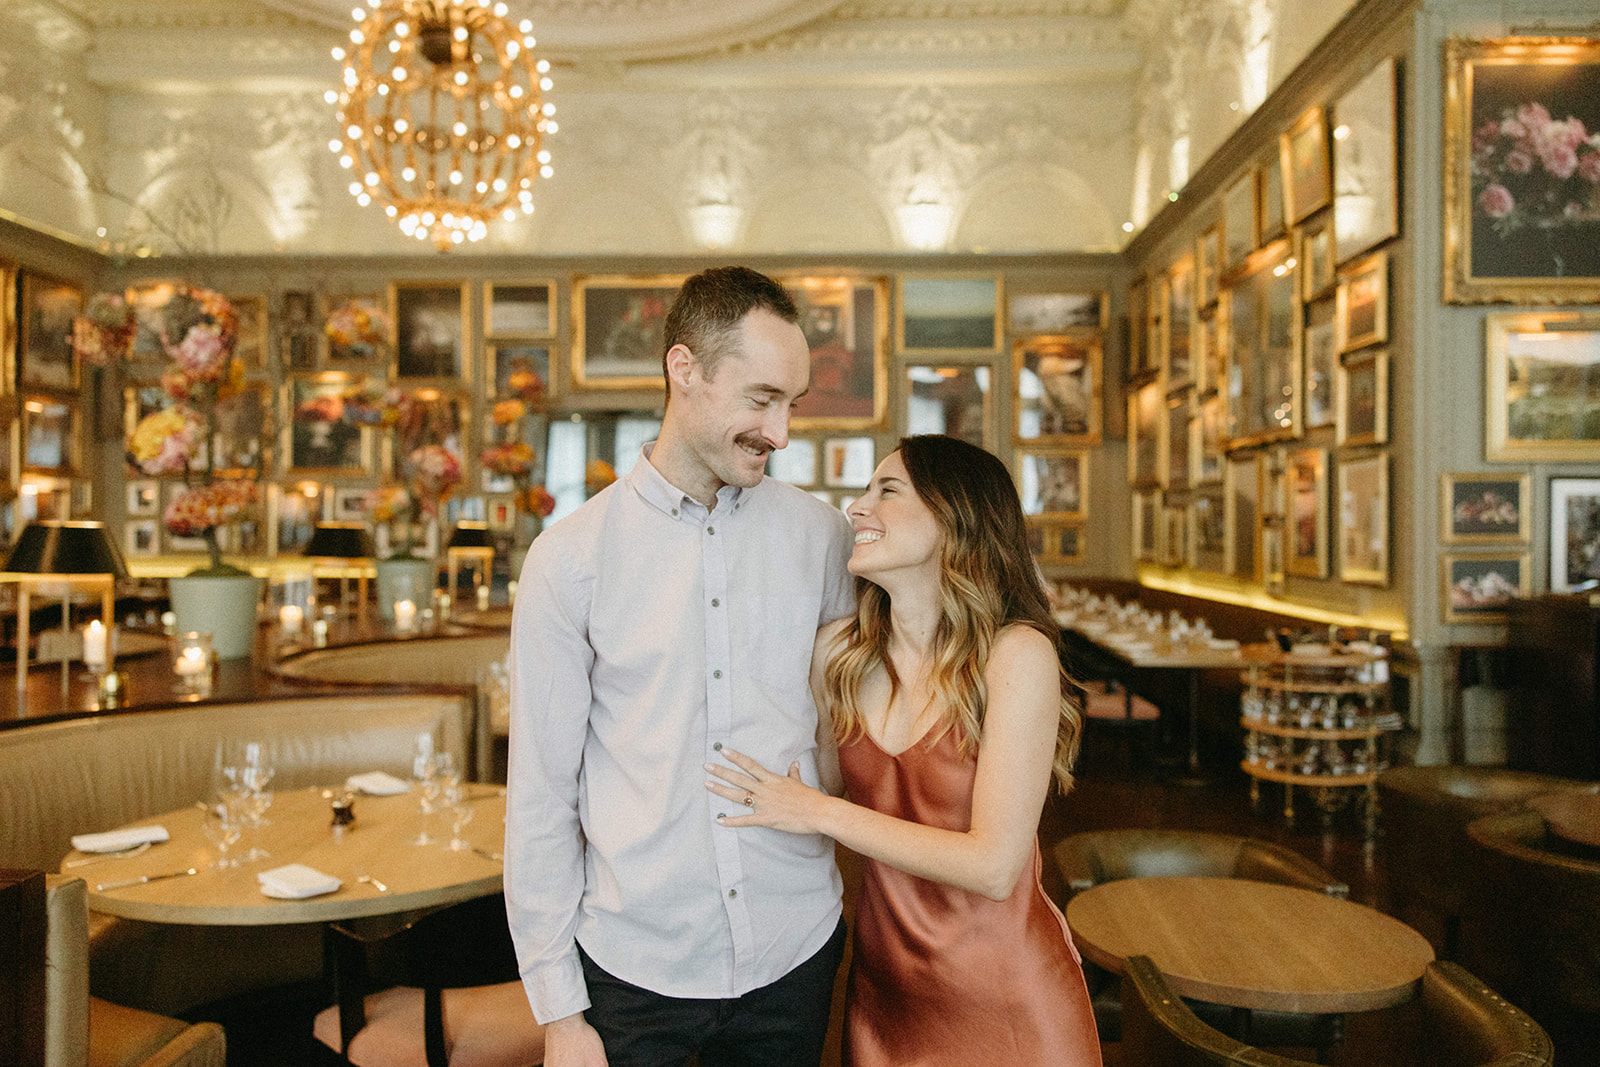 An engaged couple dressed in elevated engagement outfits embrace while laughing in a romantic London restaurant.